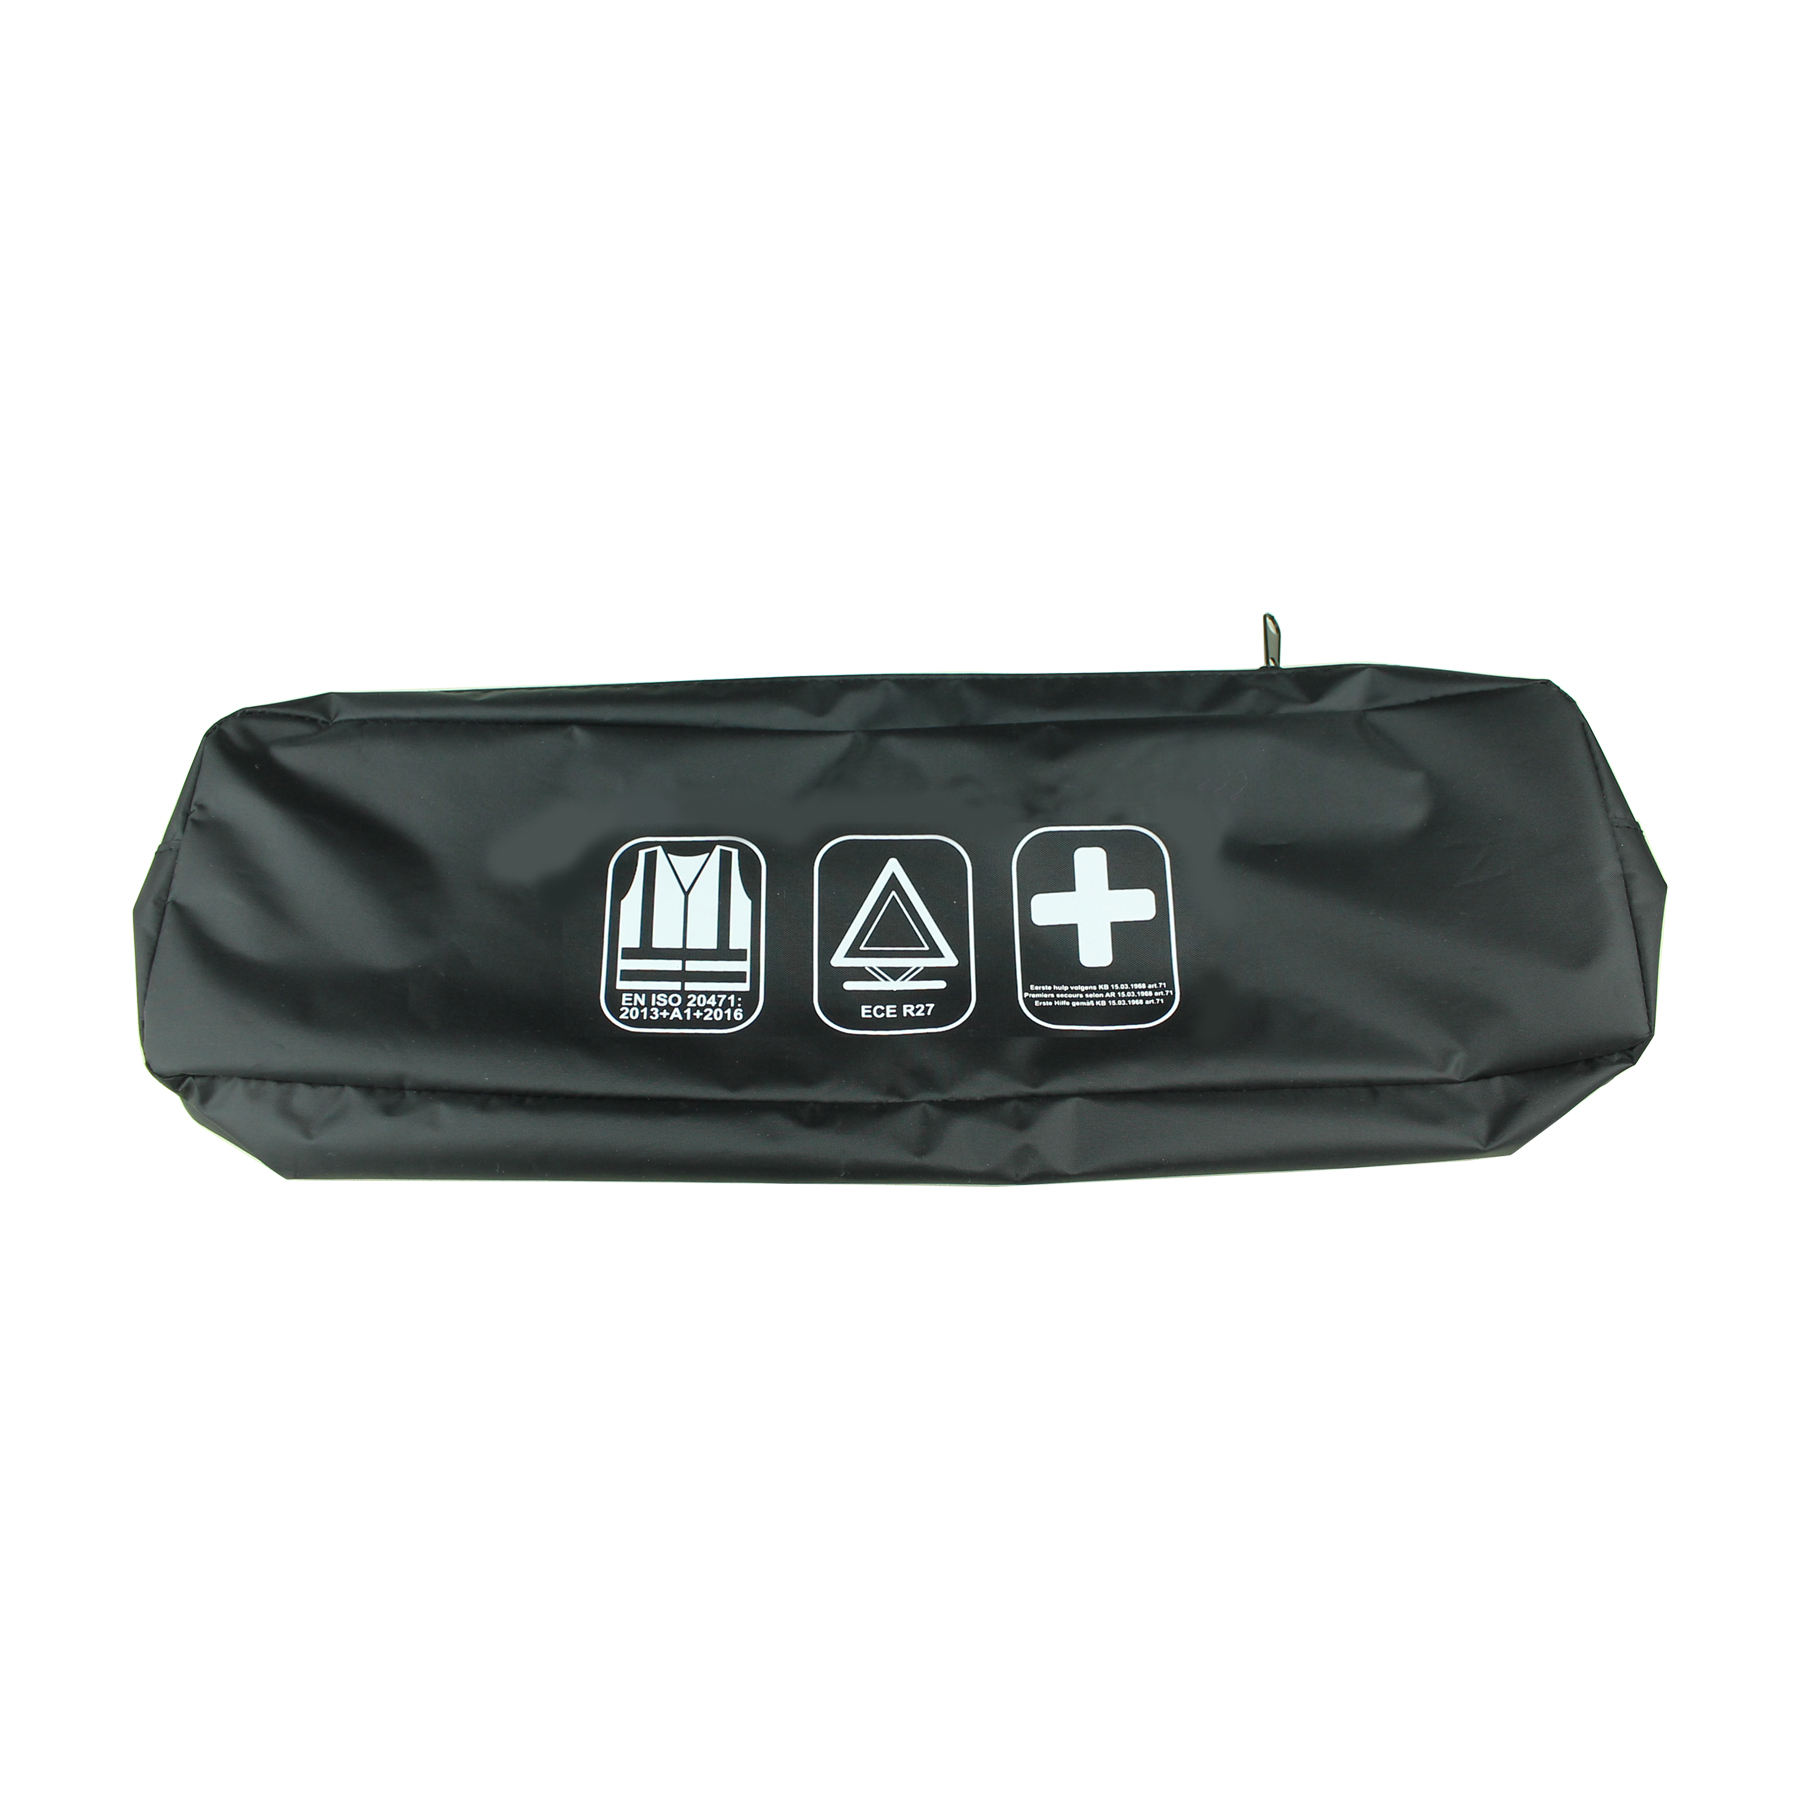 Empty Vehicle First Aid Bag